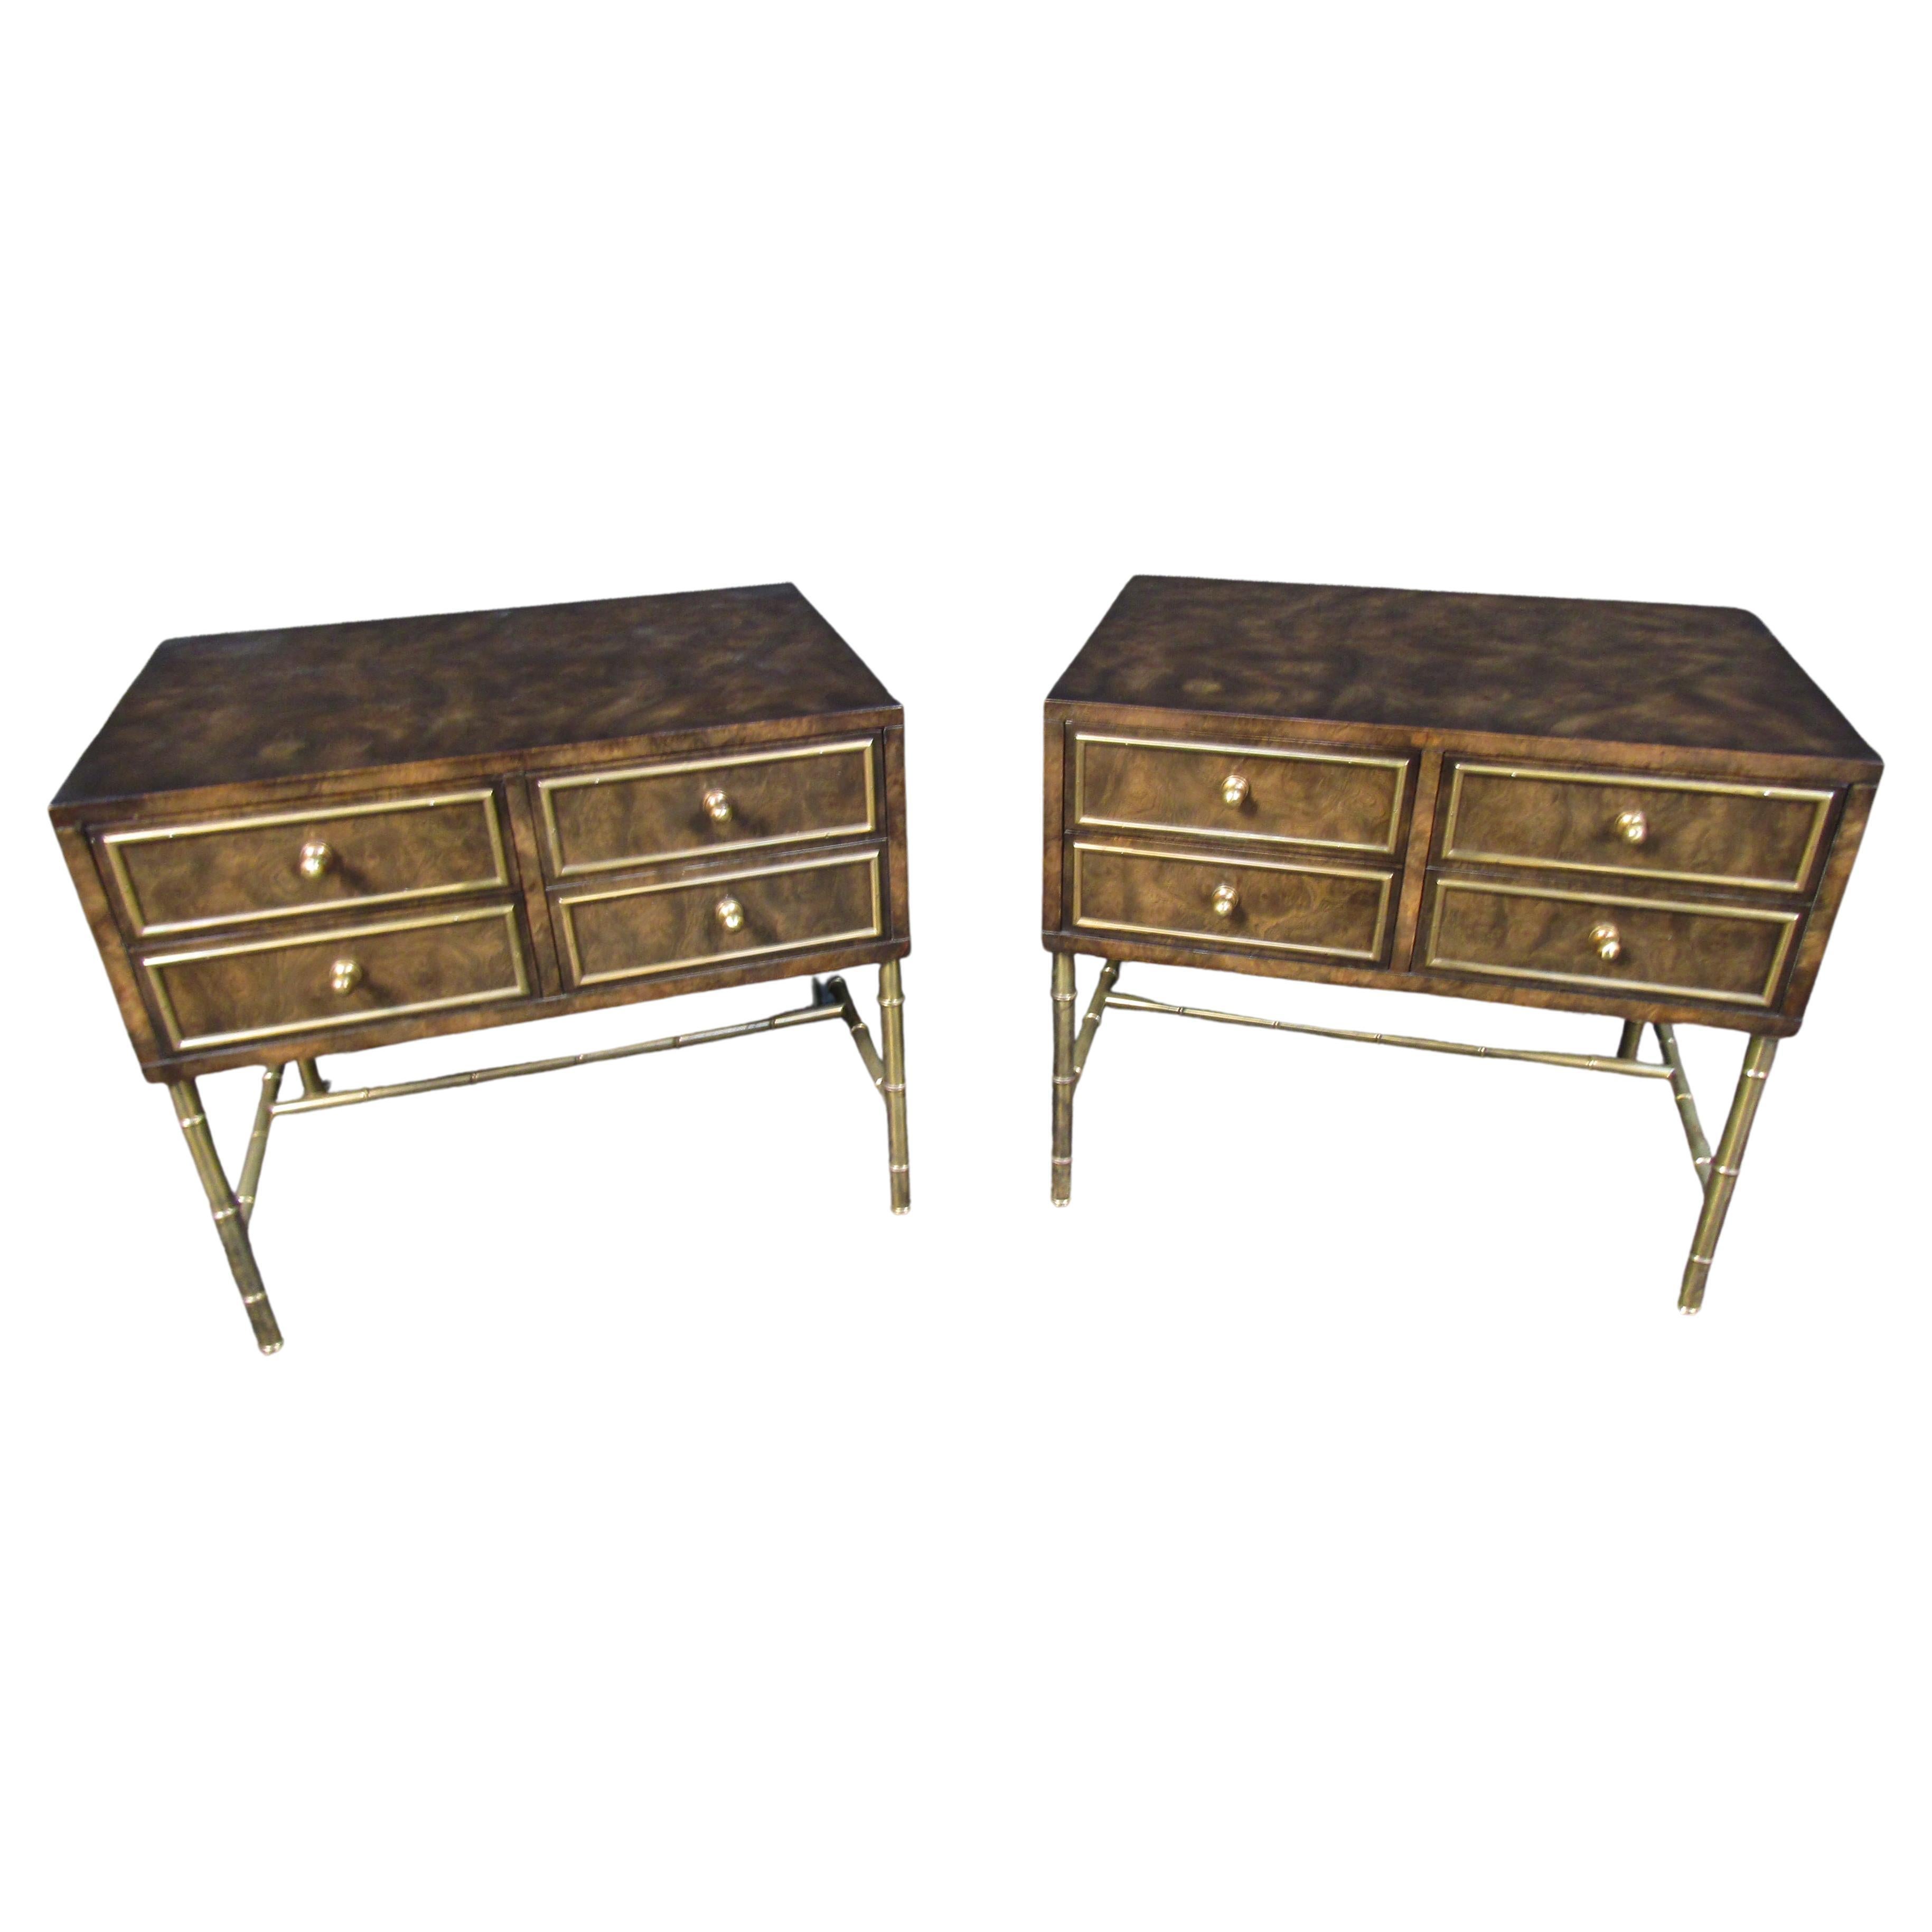 Vintage Pair of Burl and Brass Night Stands by Mastercraft